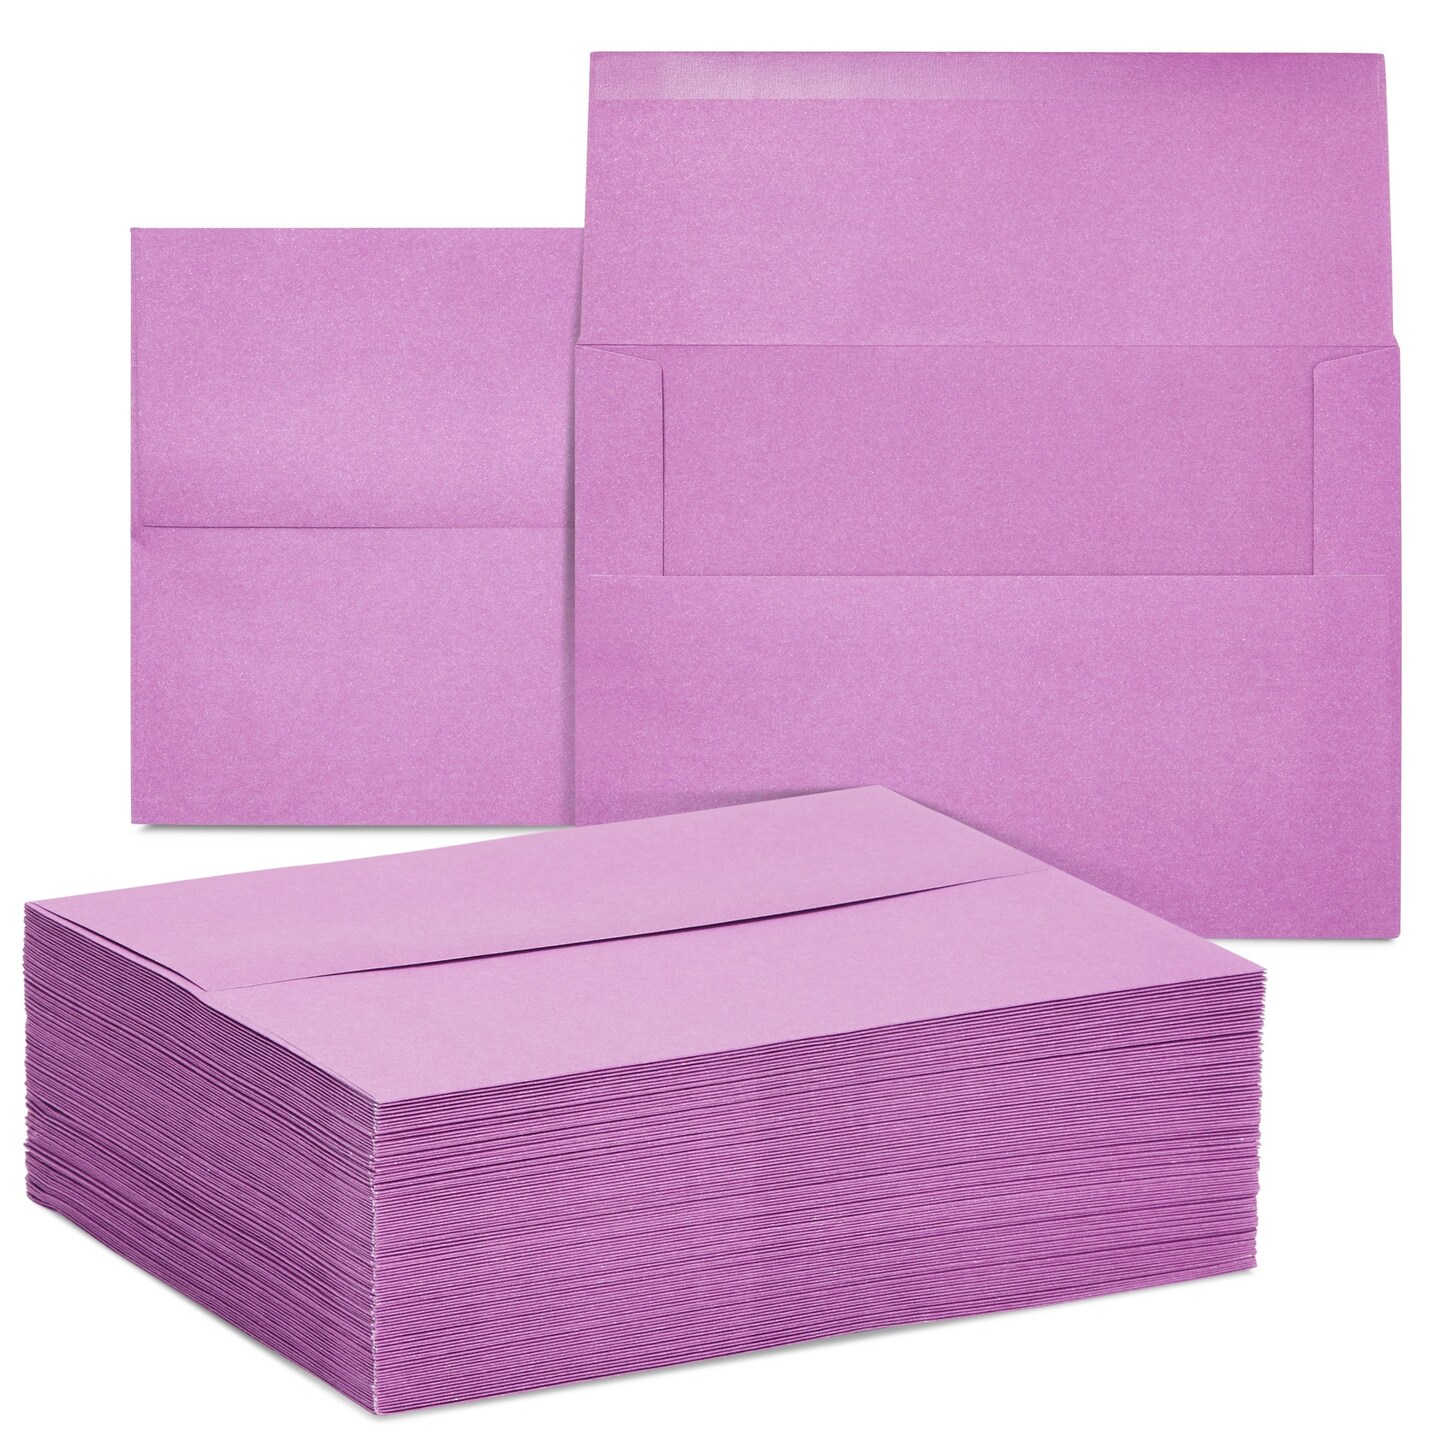 100 Pack Blank Invitation Cards and Envelopes for Weddings, Birthday Party,  5x7